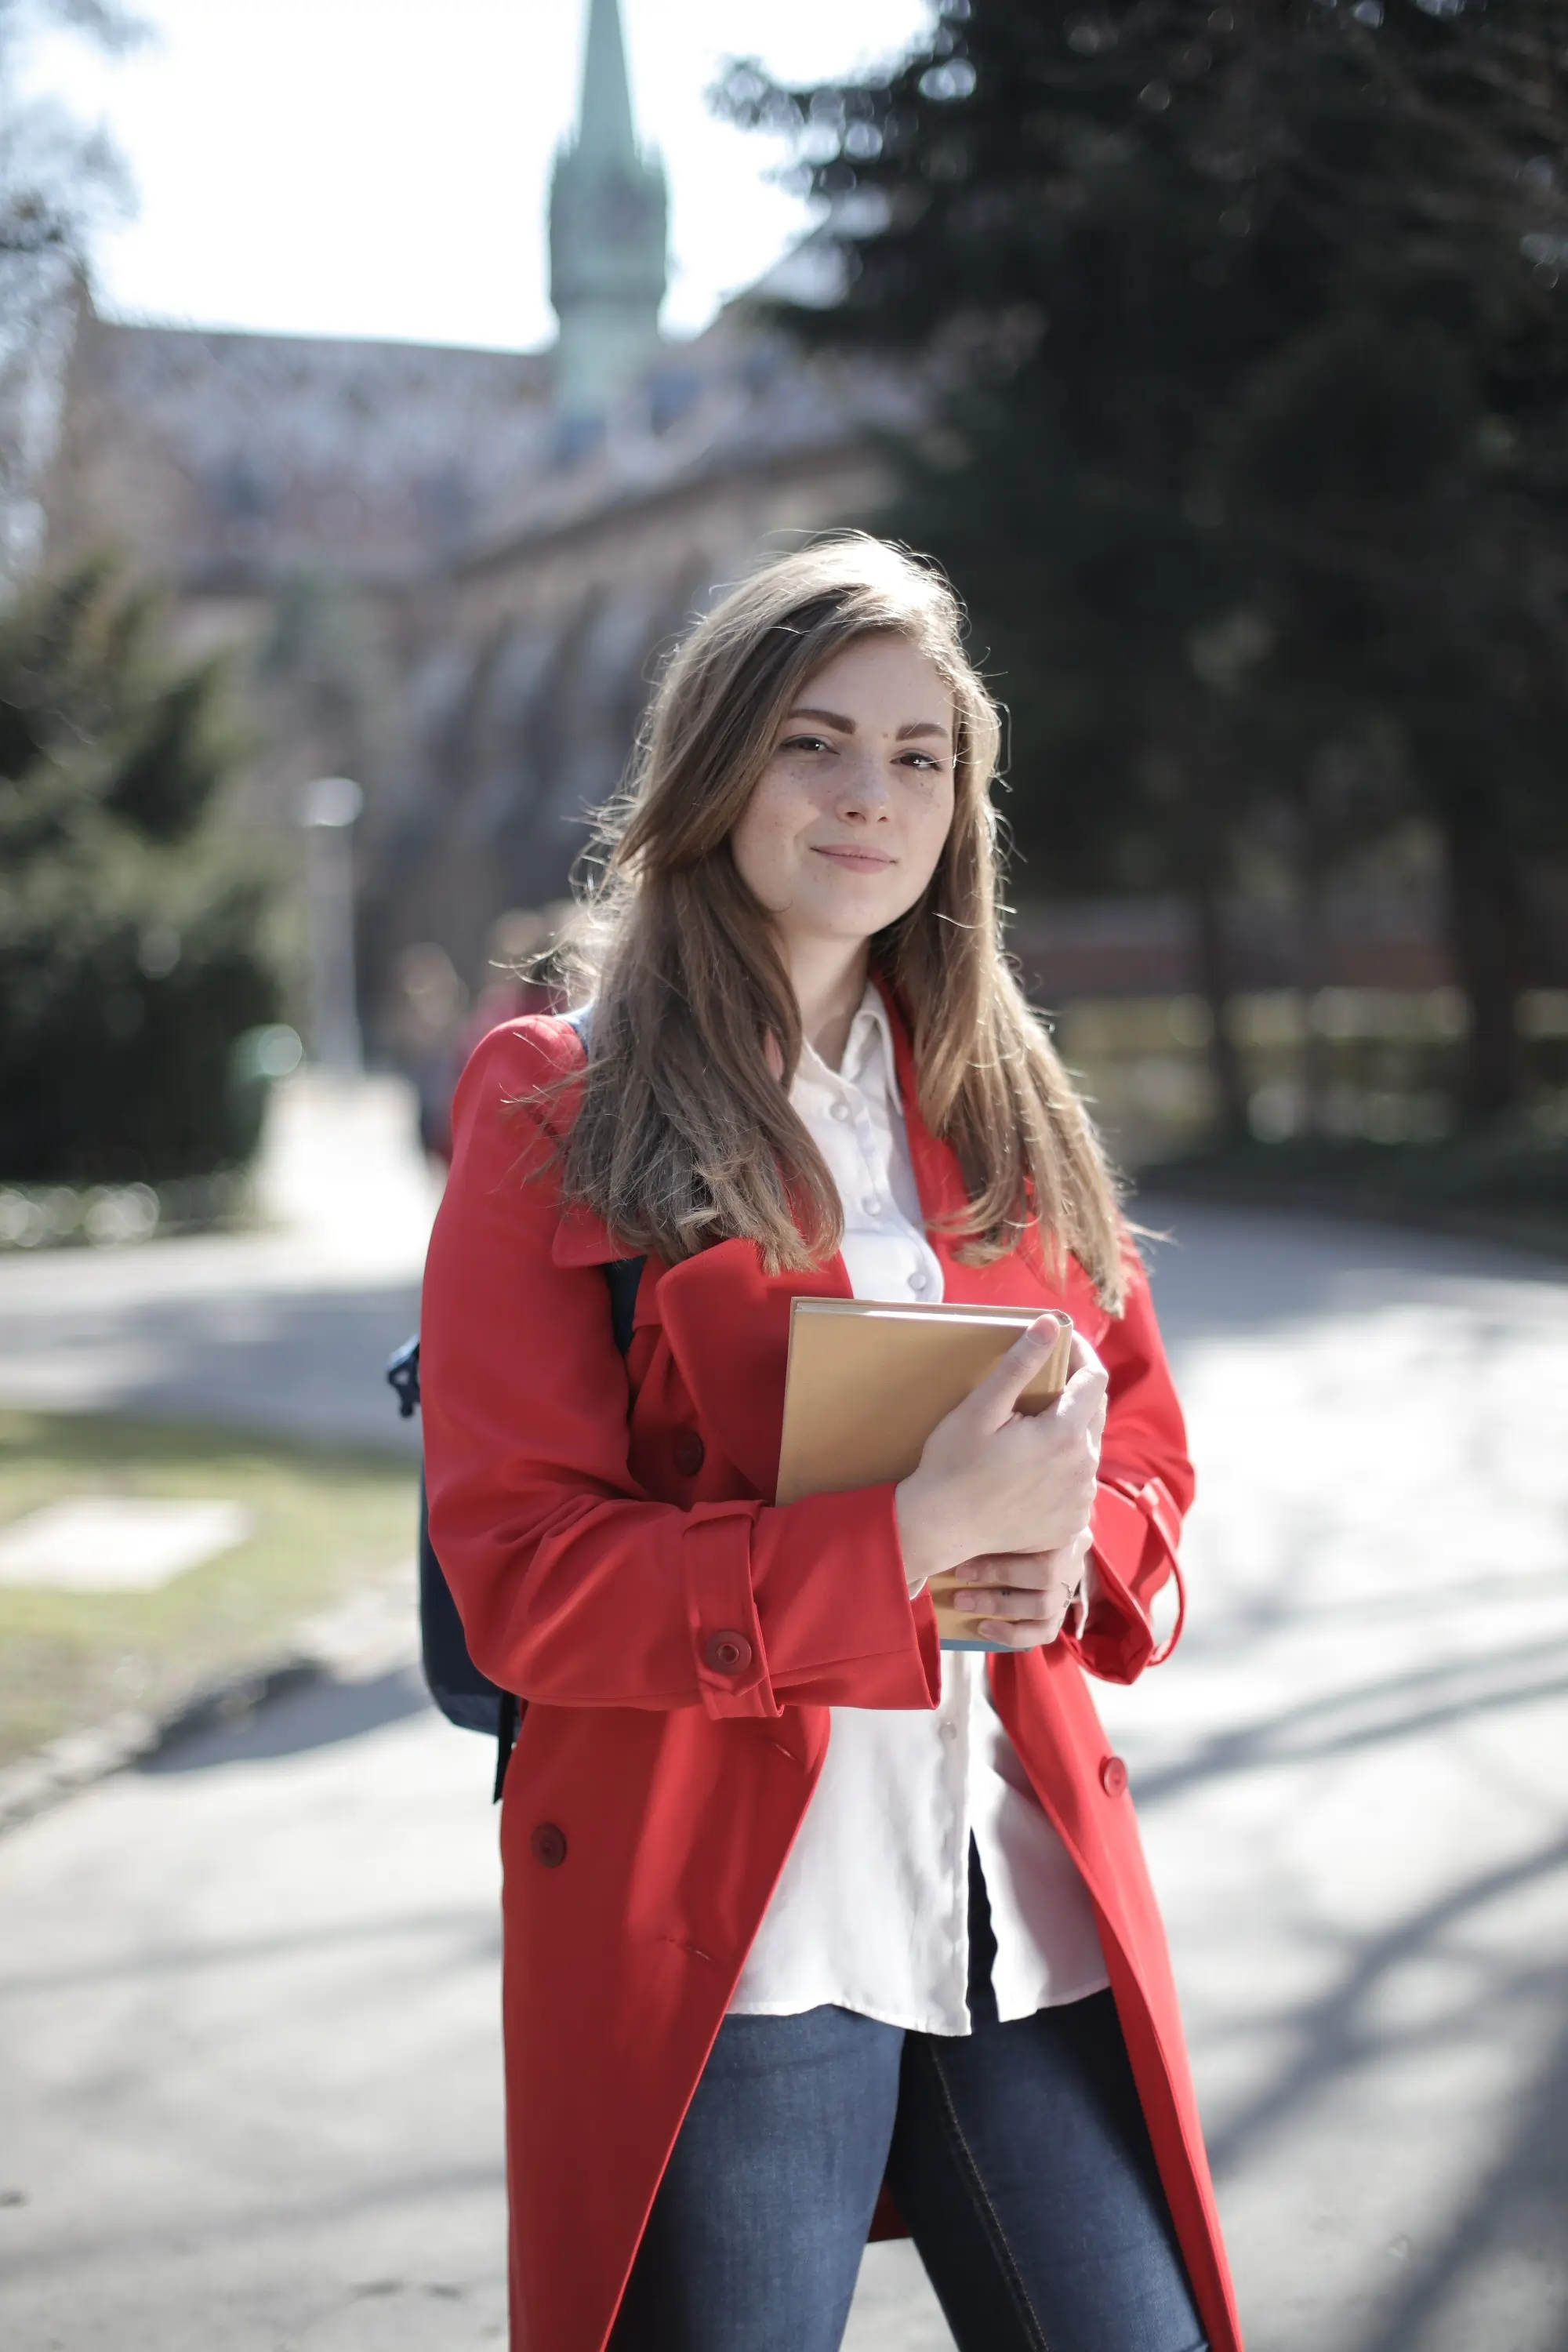 Brown-haired student escort with red jacket